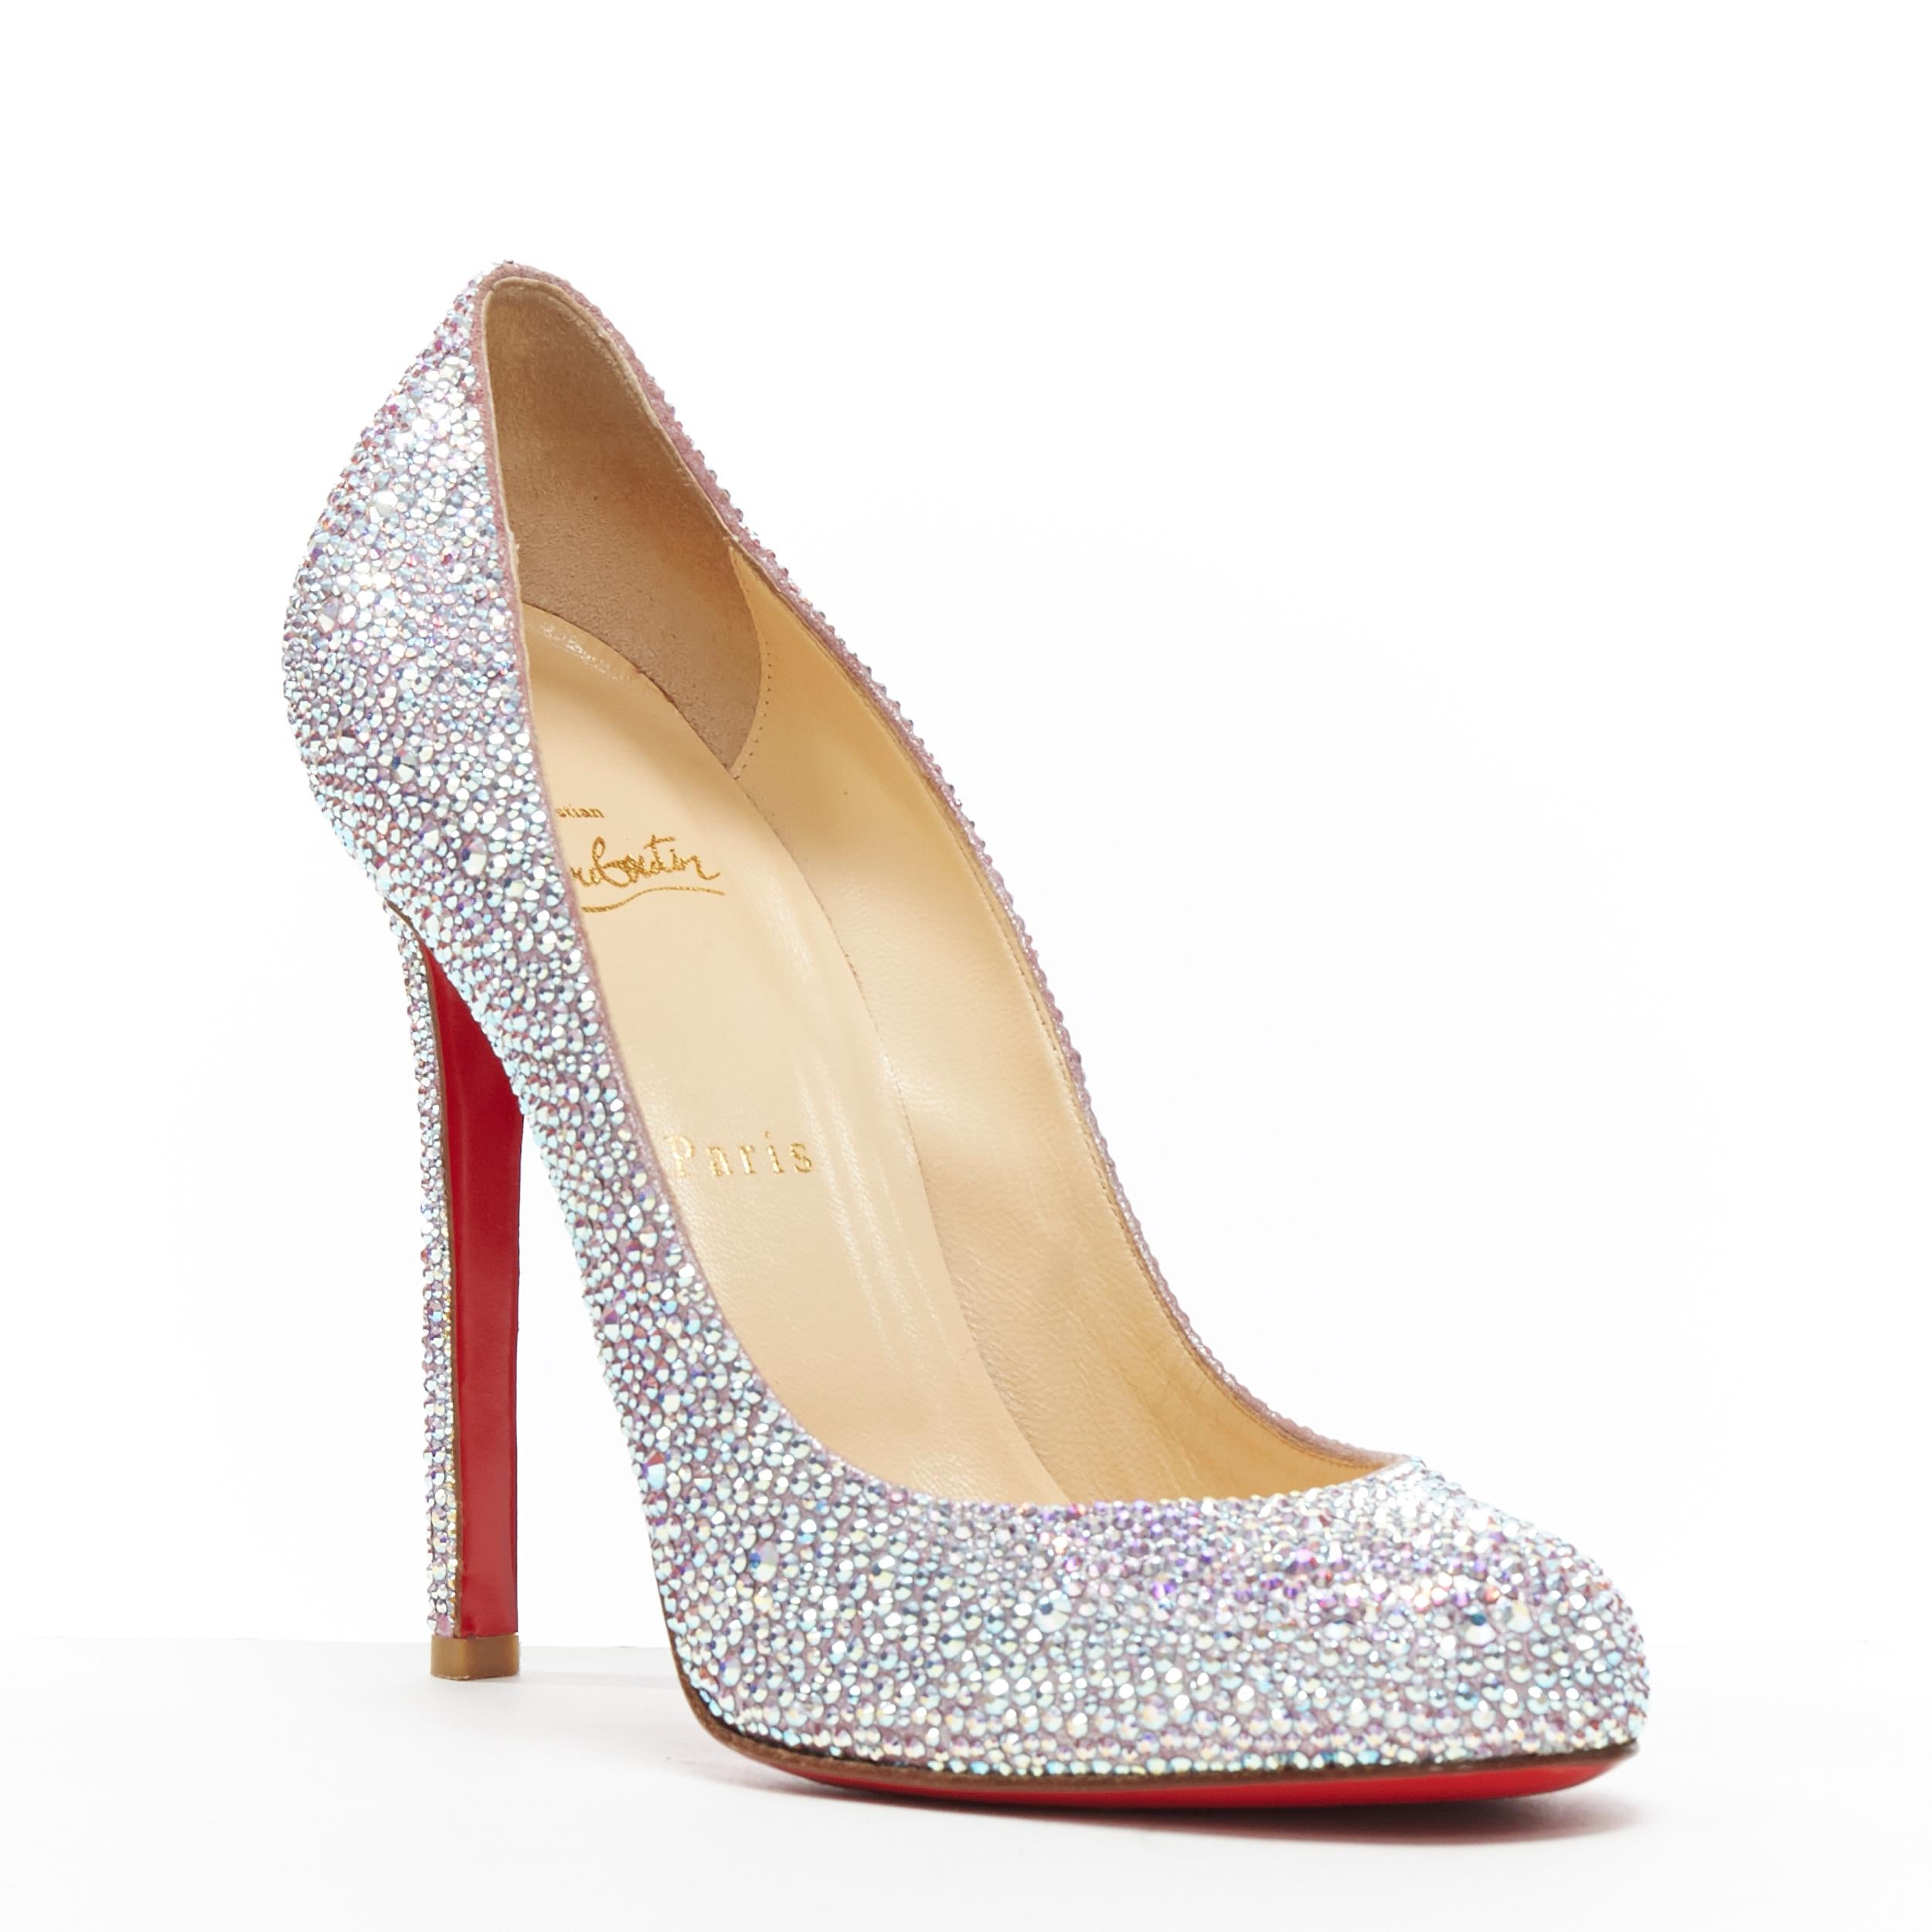 new CHRISTIAN LOUBOUTIN Lady Lynch 120 Strass Crystal bridal heels pump EU38.5
Brand: Christian Louboutin
Designer: Christian Louboutin
Model Name / Style: Lady Lynch 120
Material: Suede
Color: Other
Pattern: Solid
Closure: Slip on
Extra Detail: